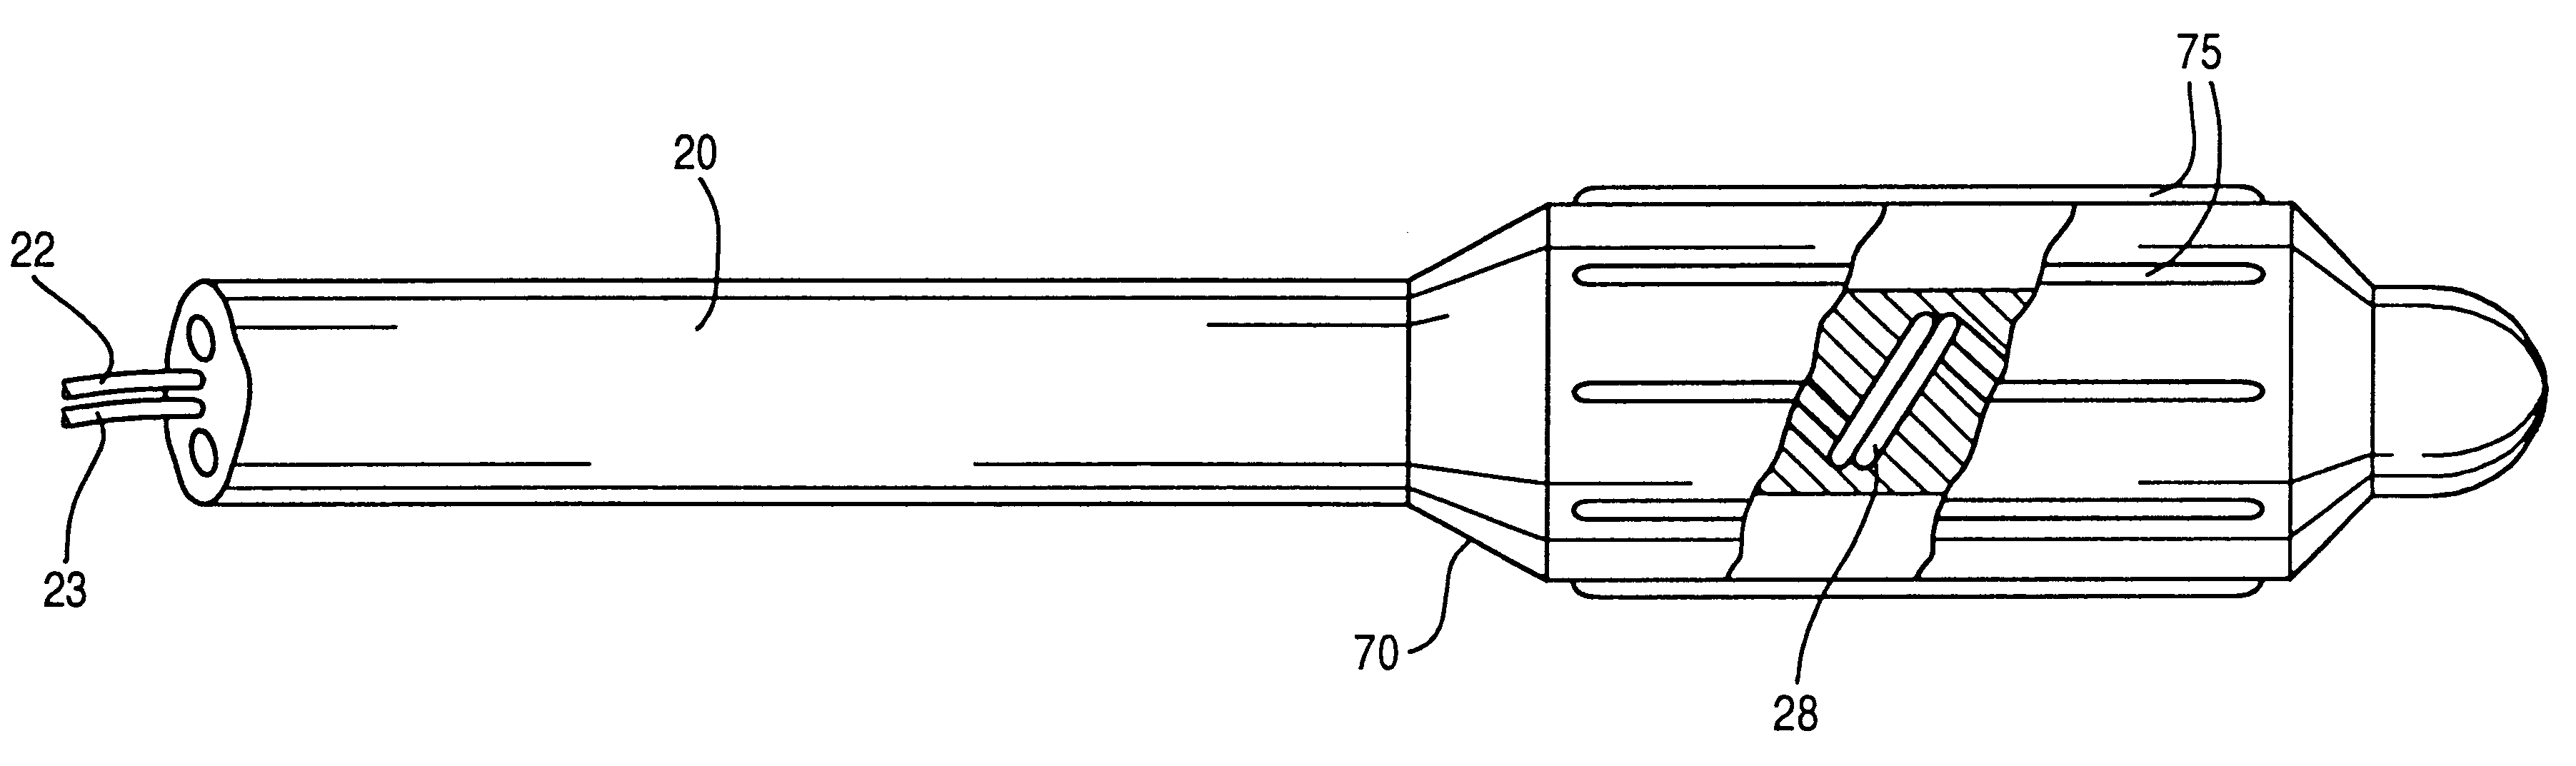 Catheter system for controlling a patient's body temperature by in situ blood temperature modification